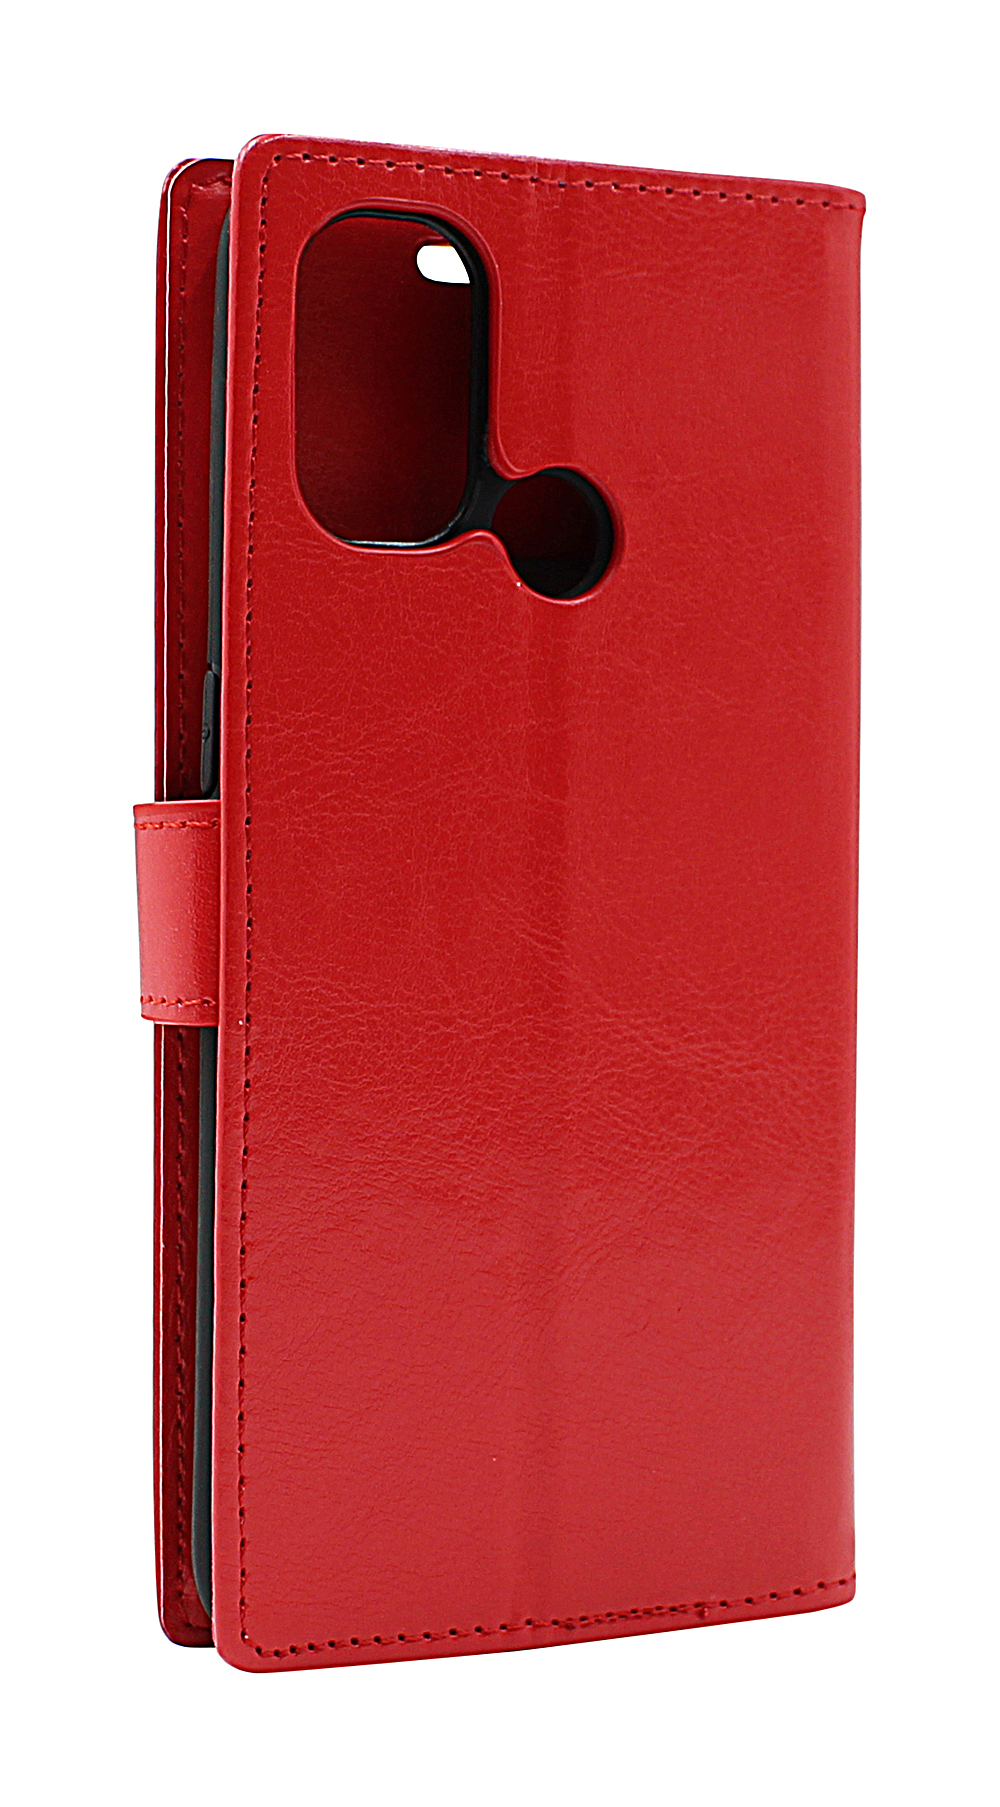 Crazy Horse Wallet OnePlus Nord N100